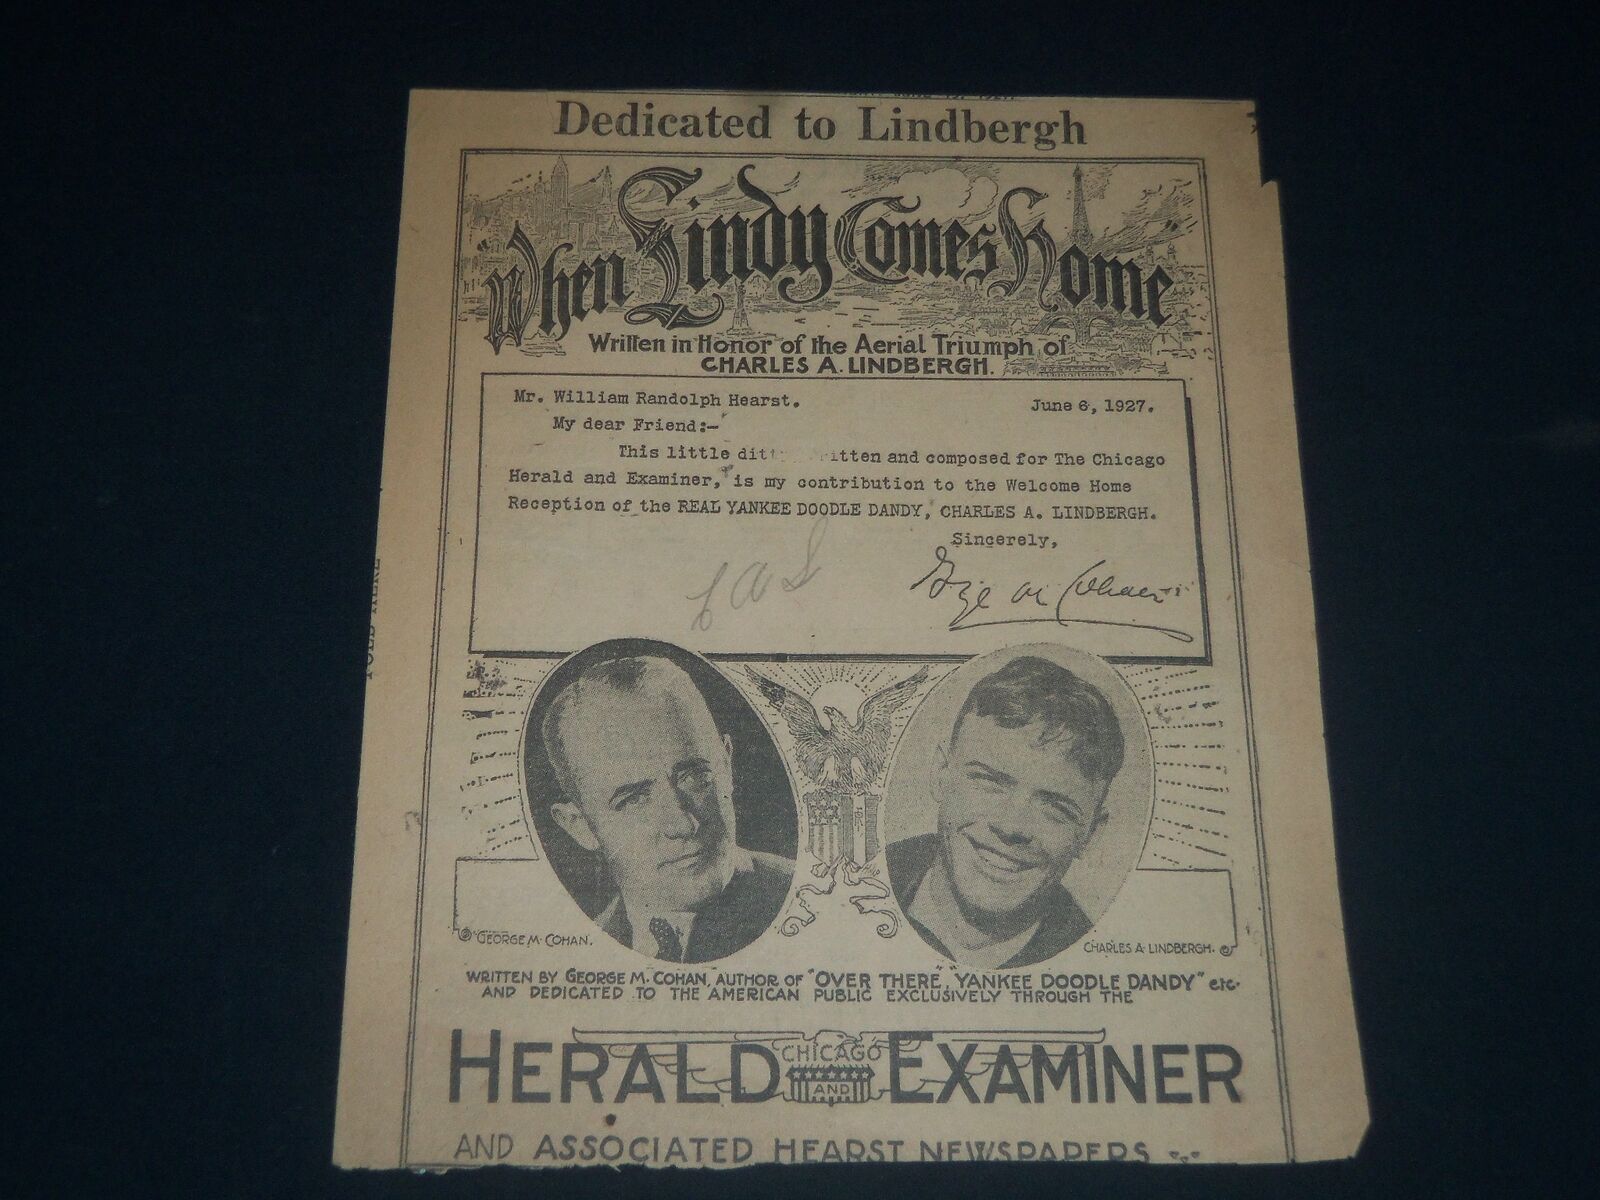 1927 JUNE 6 WHEN LINDY COMES HOME BY GEORGE M. COHAN - CHICAGO HERALD - NP 3691